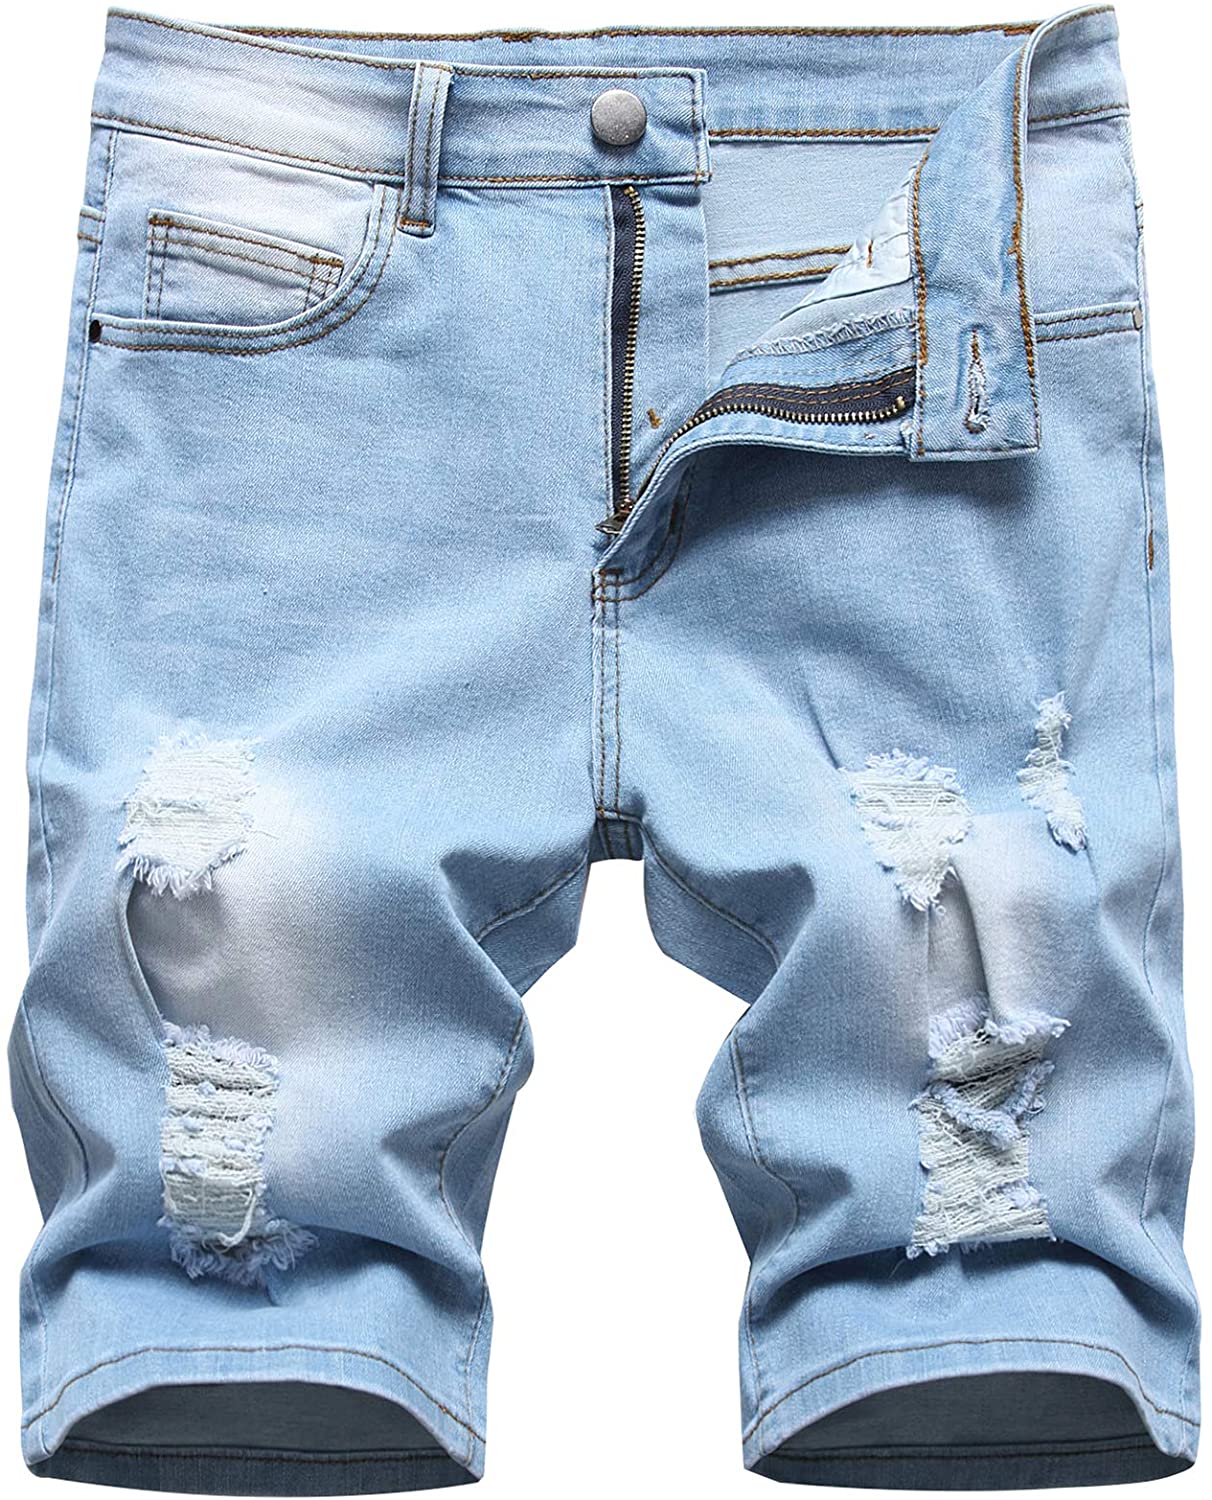 Grimgrow Men's Casual Ripped Jeans Distressed Washed Straight Fit Denim Shorts 